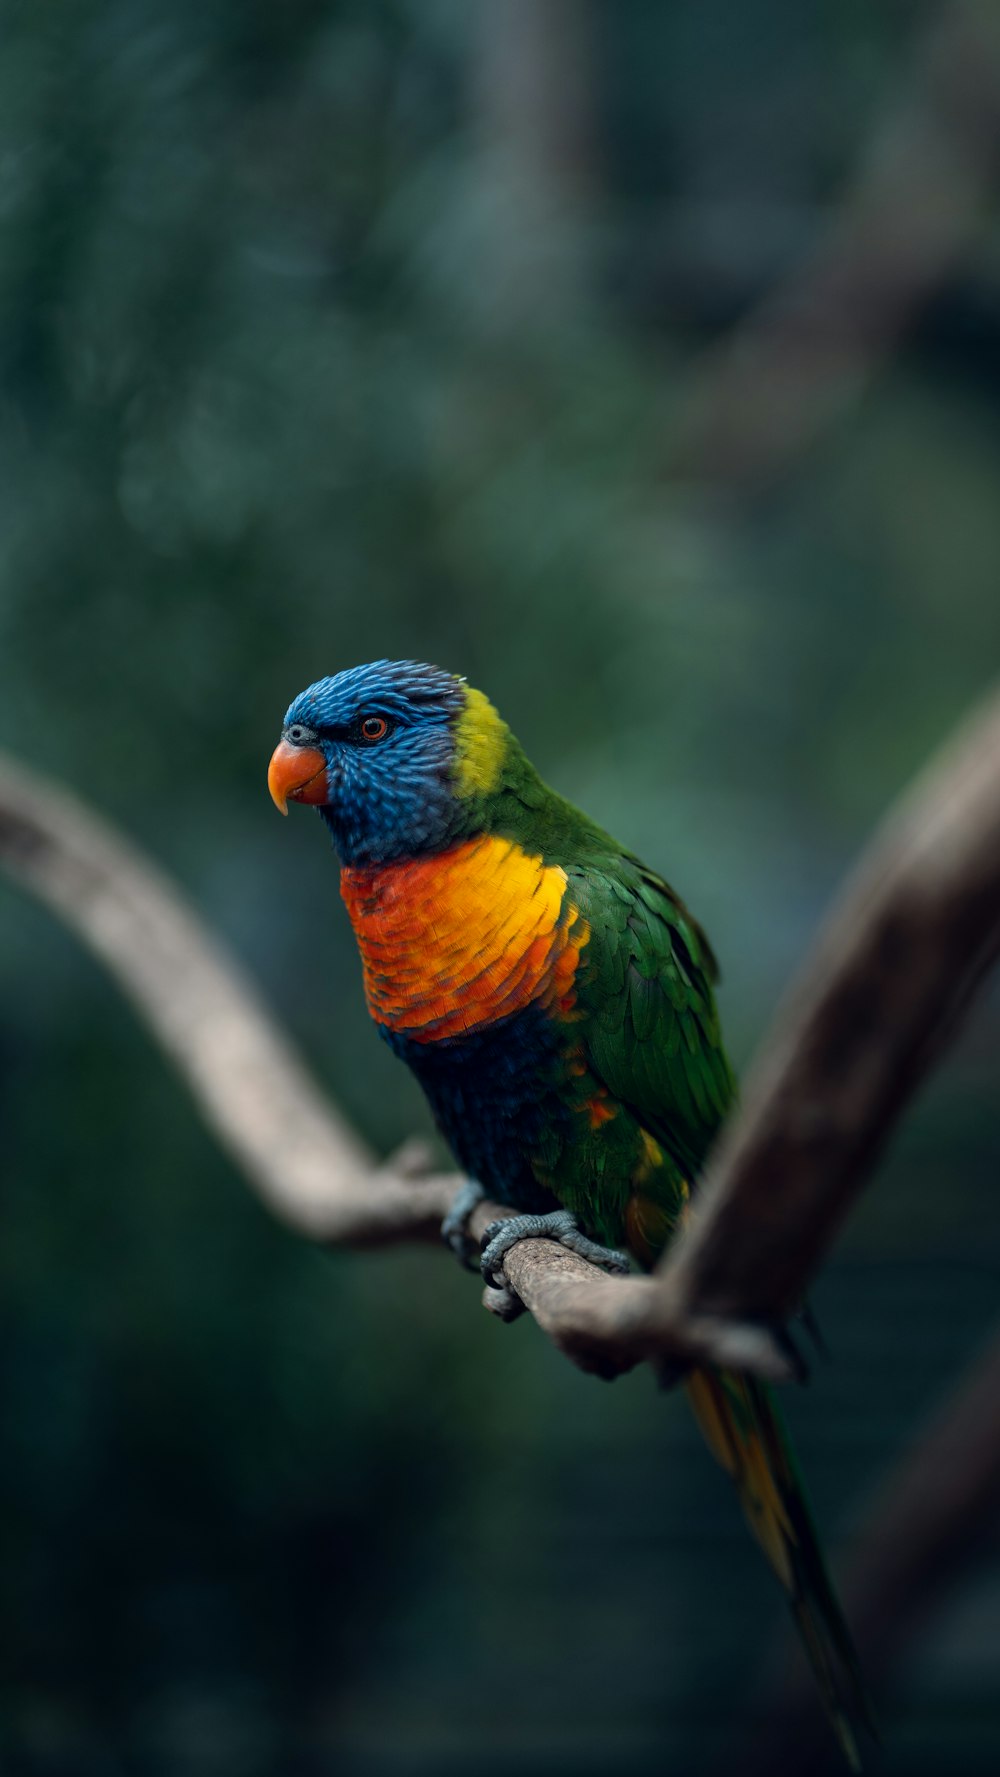 a colorful bird perched on a branch